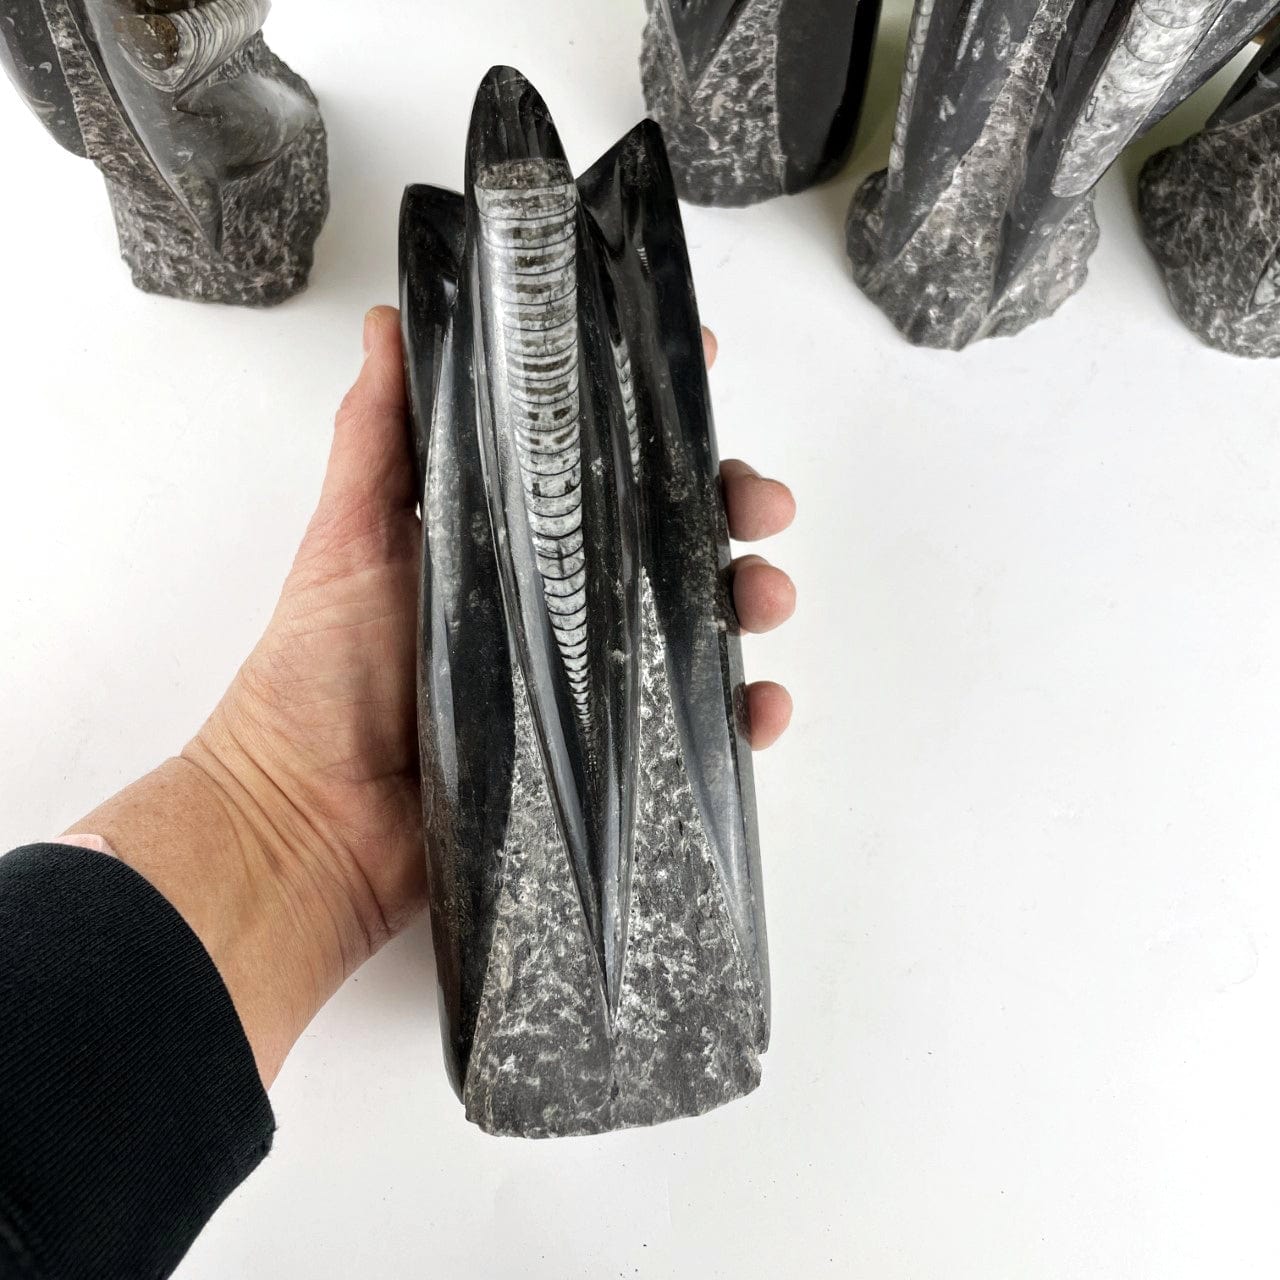 Orthoceras Fossil Tower in a hand for size reference